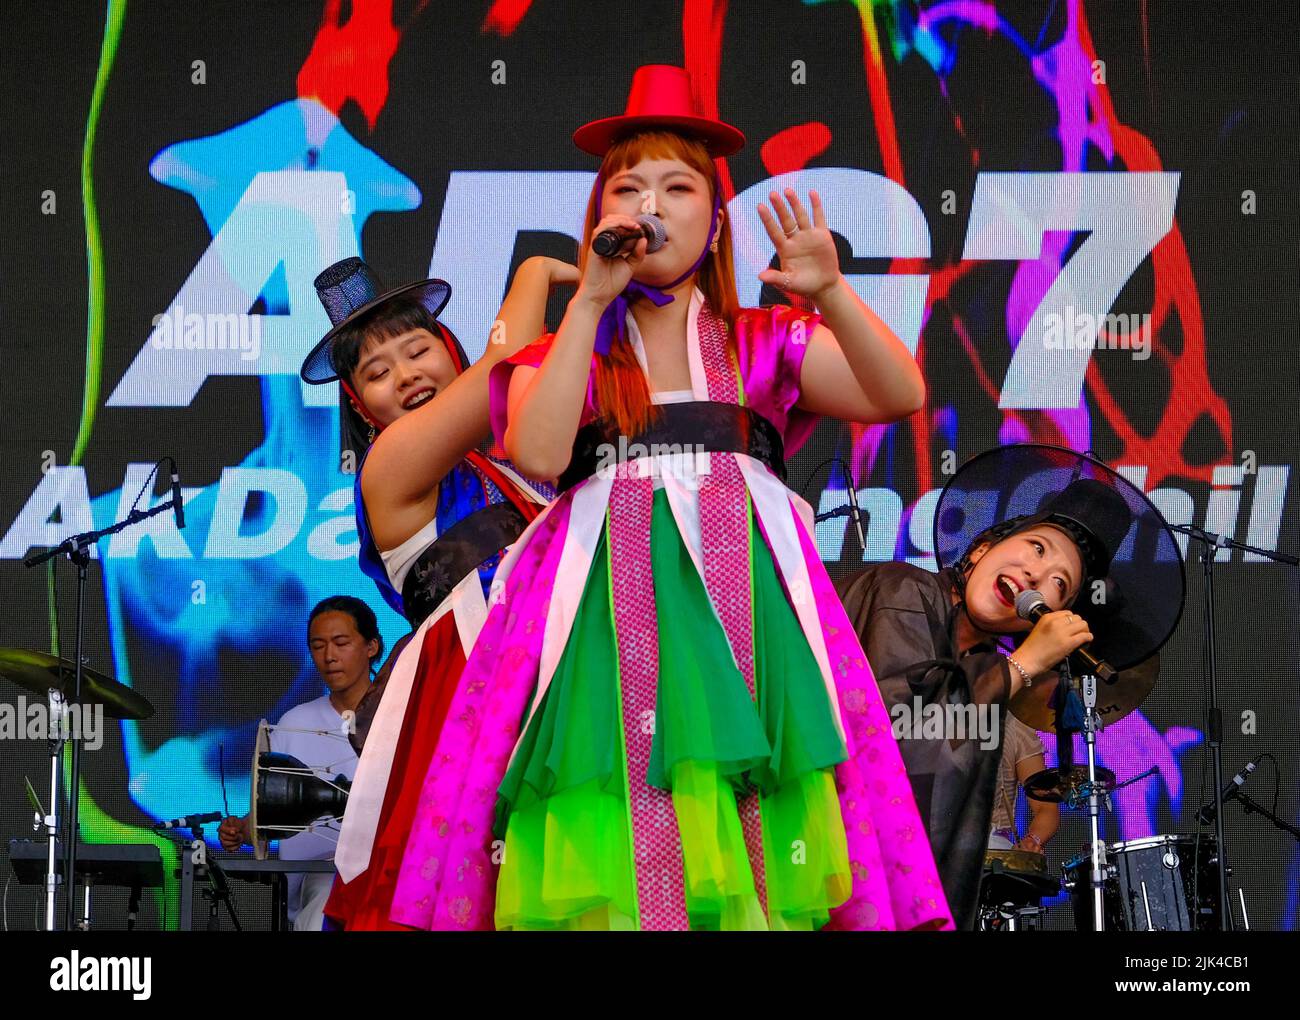 Malmesbury, Wiltshire, UK. 30th July, 2022. Malmesbury Wiltshire. Womad Festival. ADG7 from Korea the Open Air Stage. Credit: charlie bryan/Alamy Live News Stock Photo